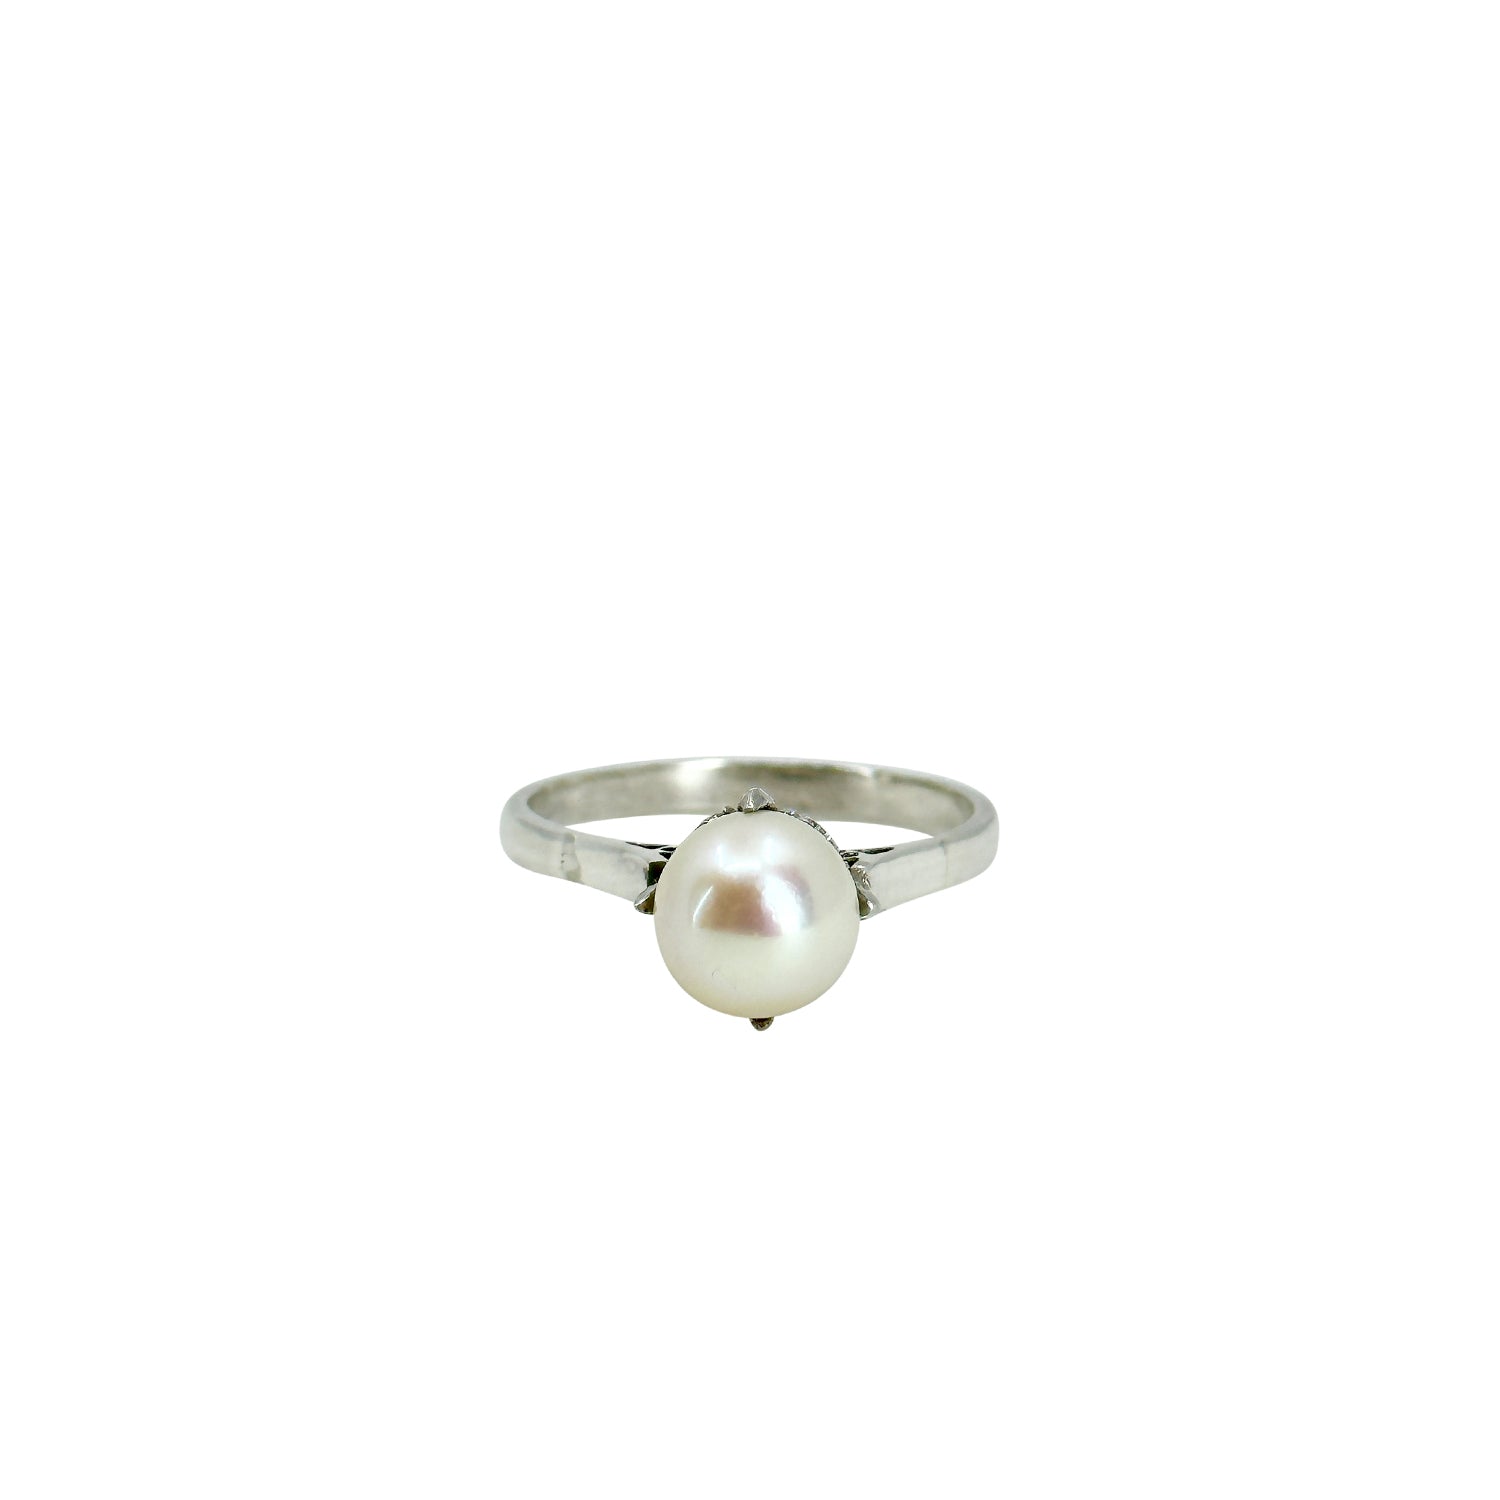 Claw Prong Art Deco Japanese Saltwater Akoya Cultured Pearl Solitaire Ring- Sterling Silver Sz 6.75